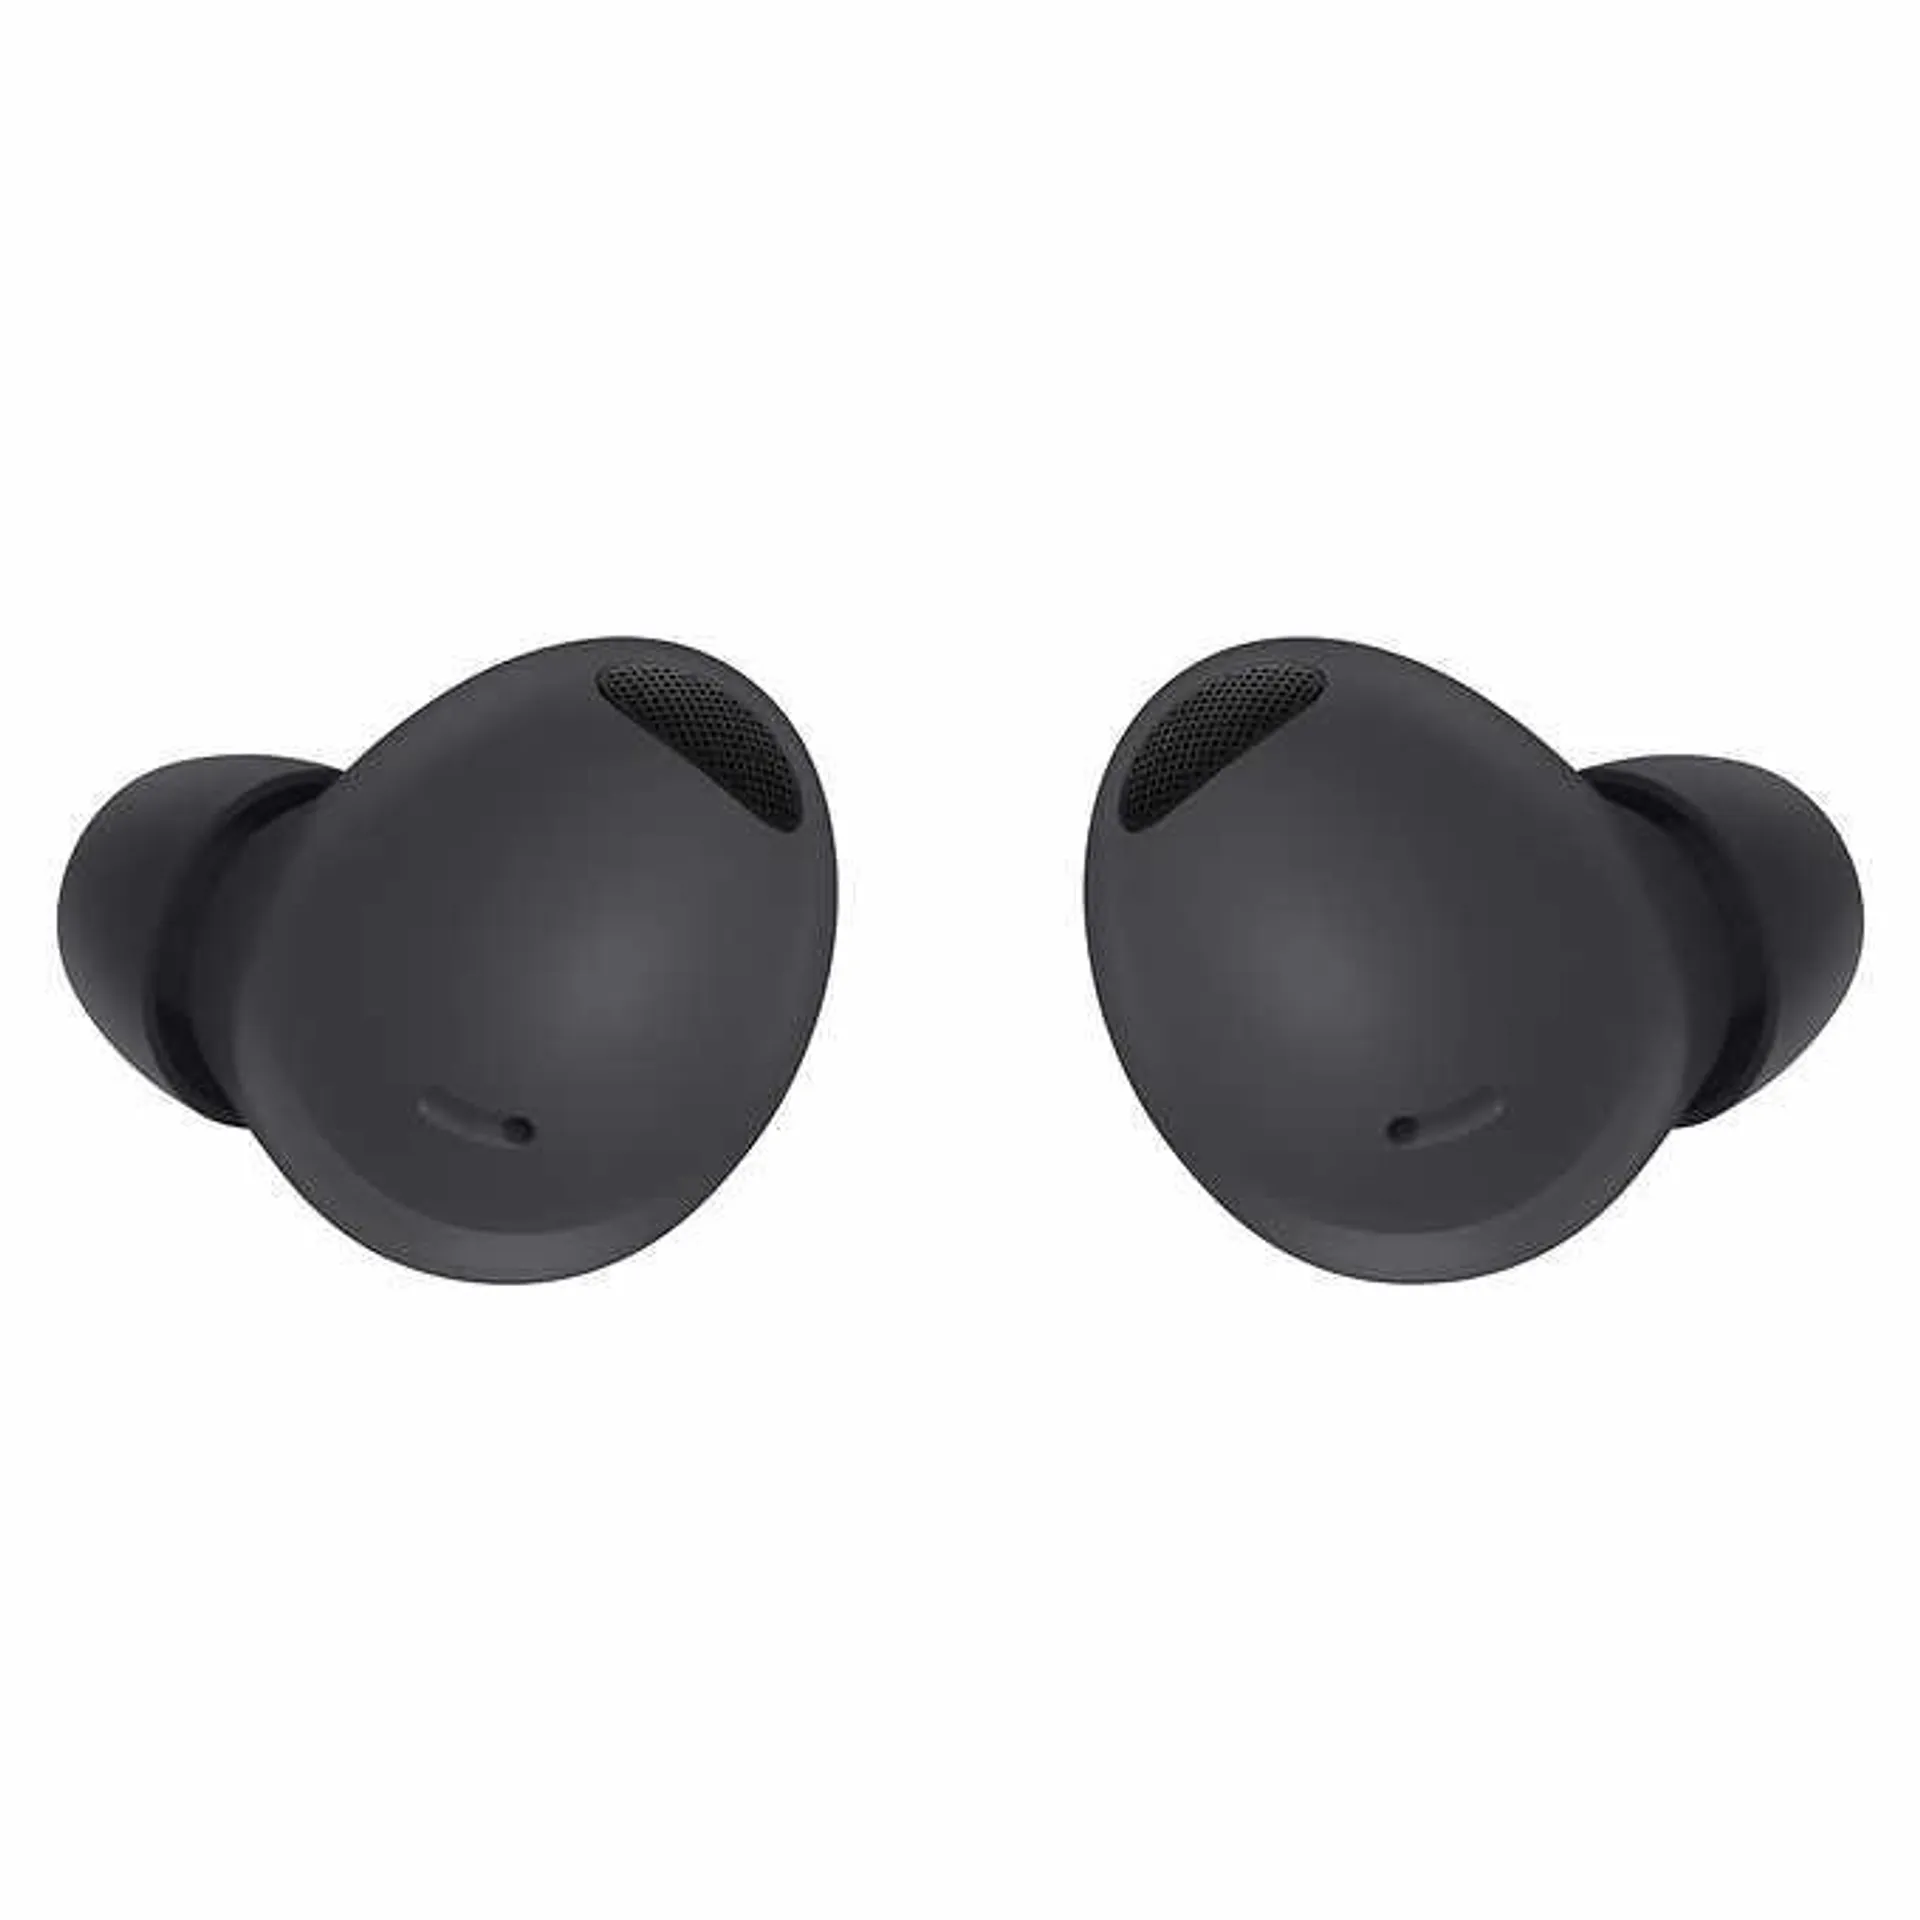 Samsung Galaxy Buds2 Pro with $20 Google Gift Code